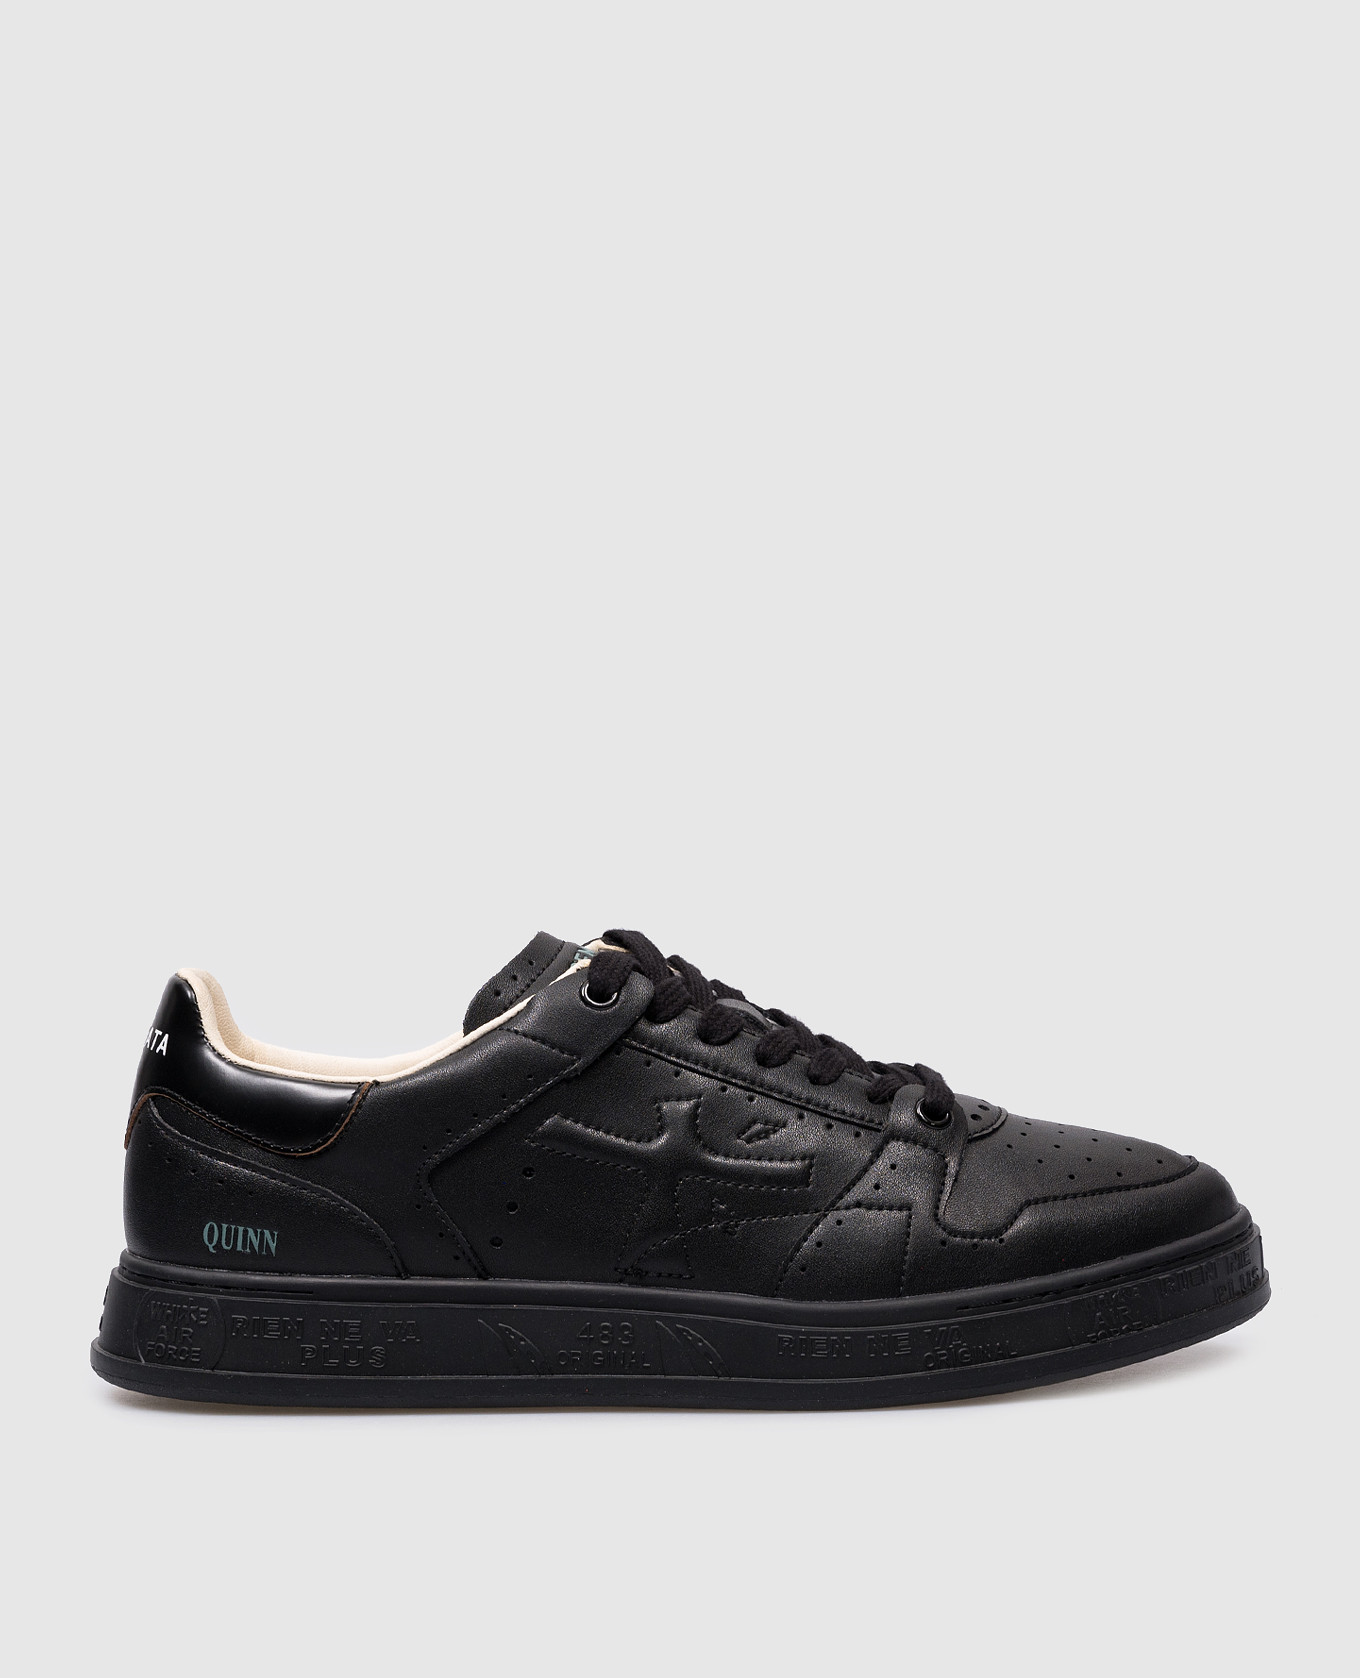 QUINN black leather sneakers